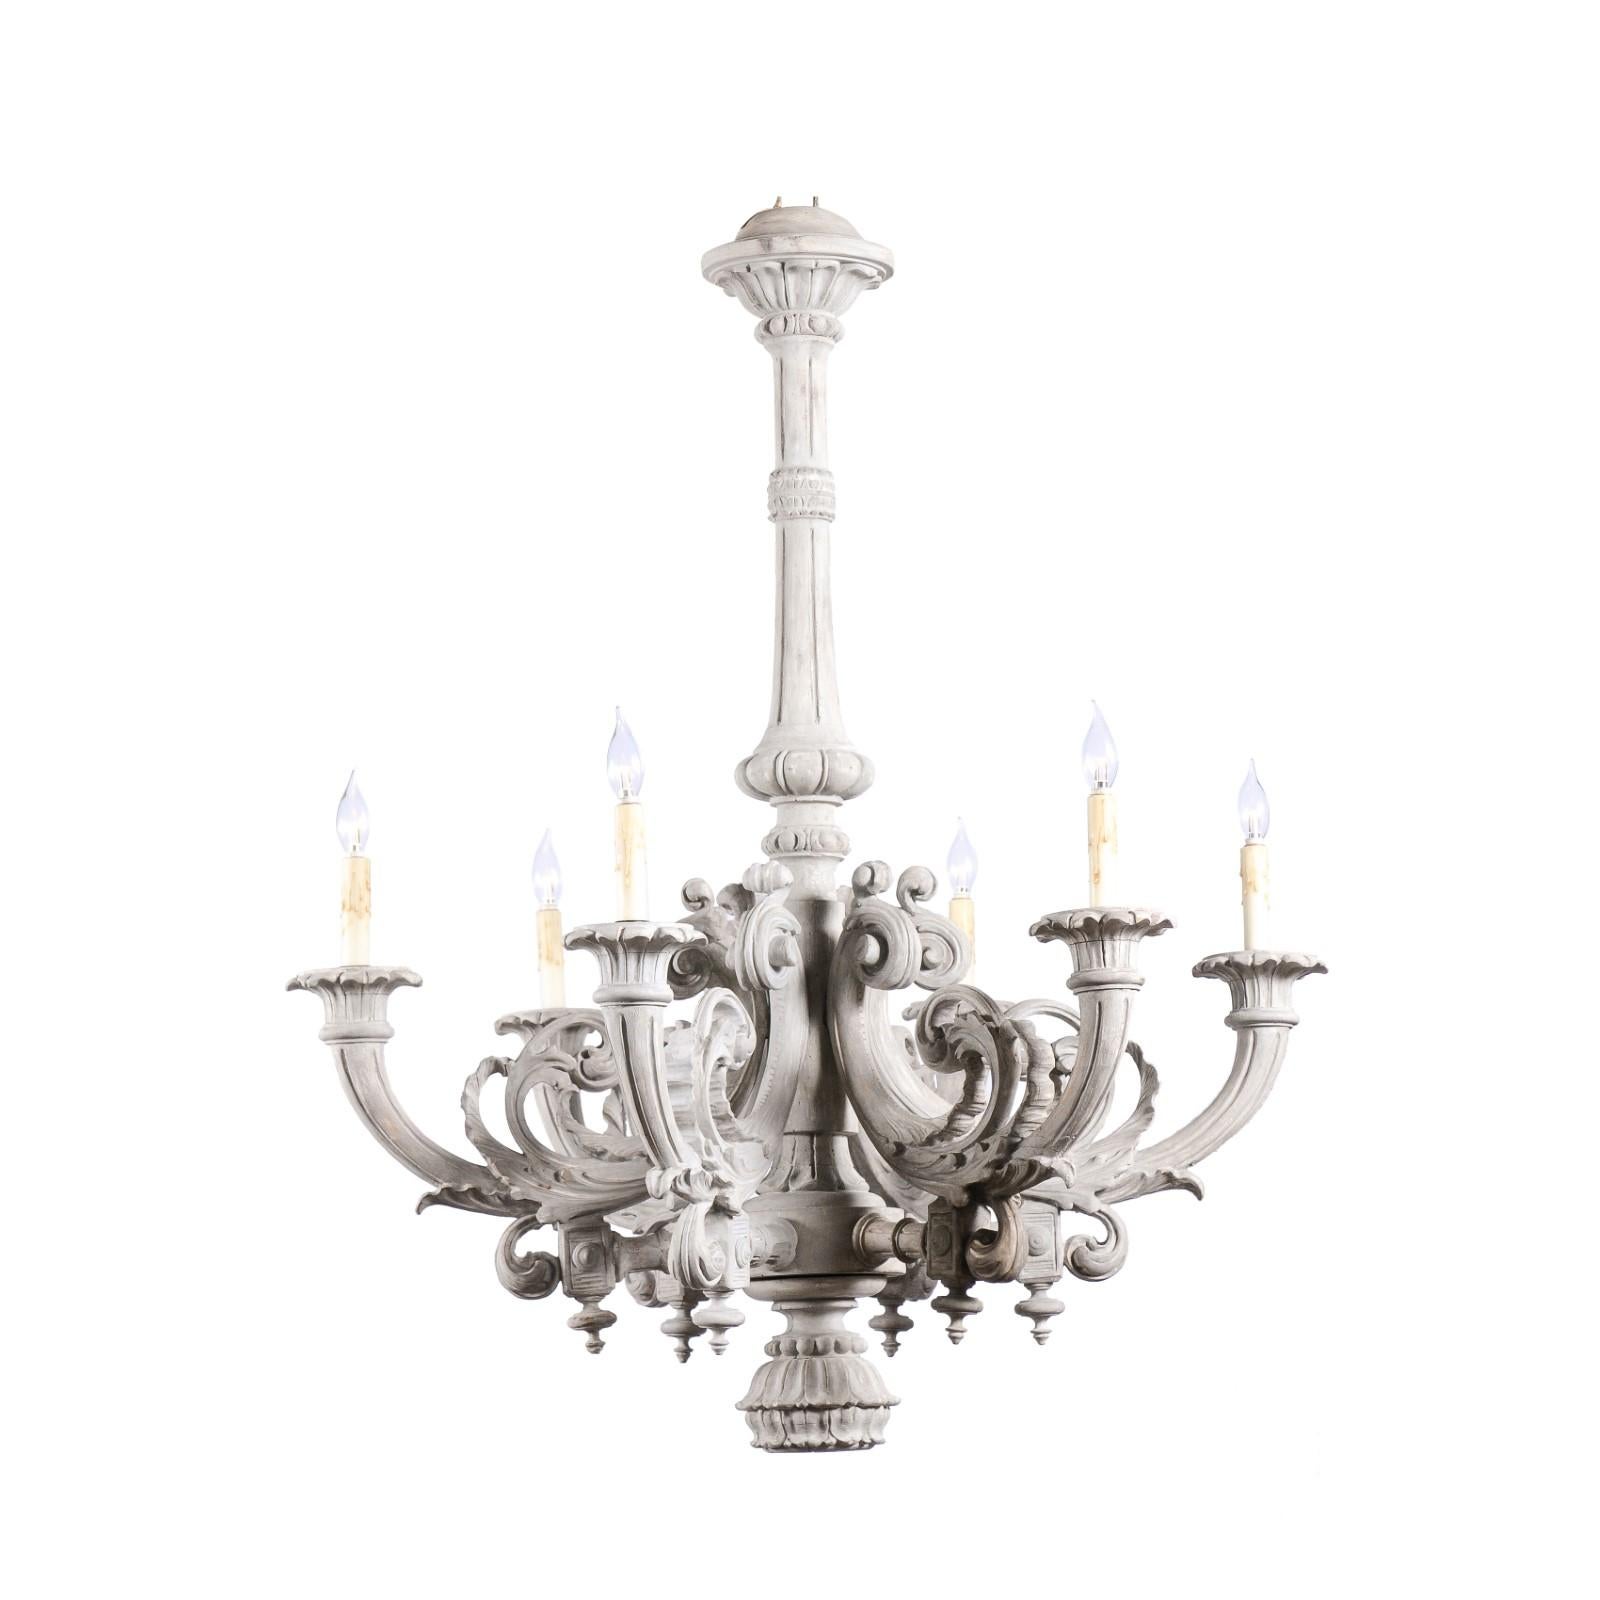 A French Turn of the Century wooden chandelier from the early 20th century, with six lights, richly carved décor, C-scroll arms and rustic wash painted finish. Created in France at the Turn of the Century in the 1900s, this wooden chandelier